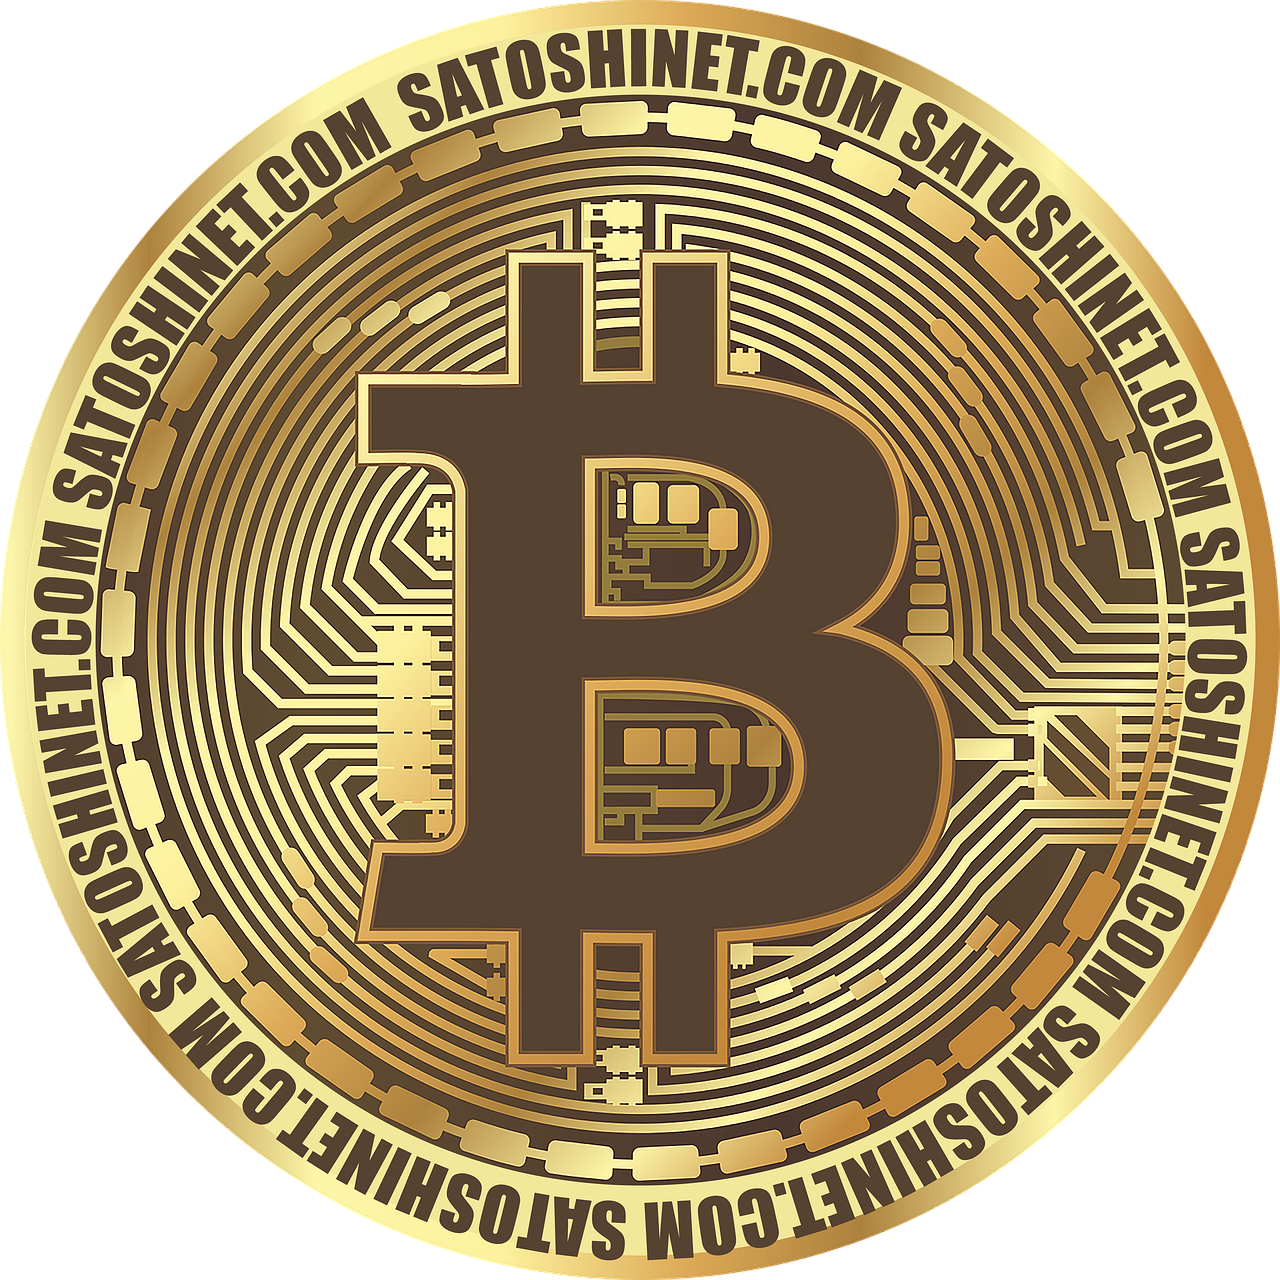 Bitcoin, btc, crypto, cryptocurrency, digital currency - free image from needpix.com